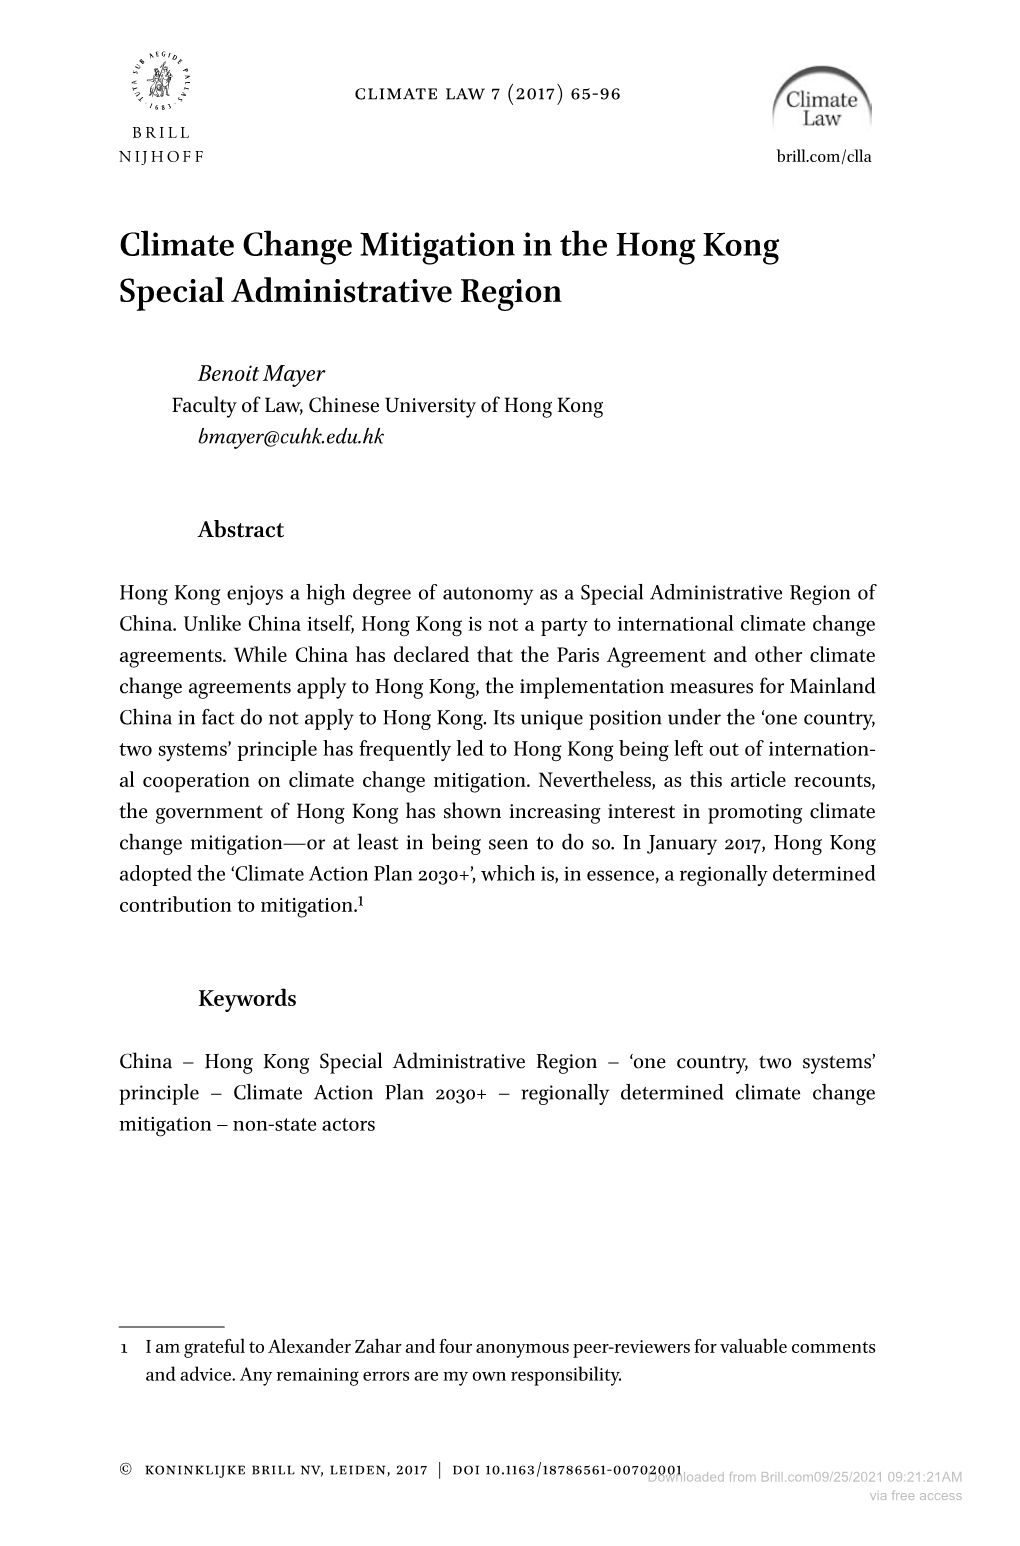 Climate Change Mitigation in the Hong Kong Special Administrative Region